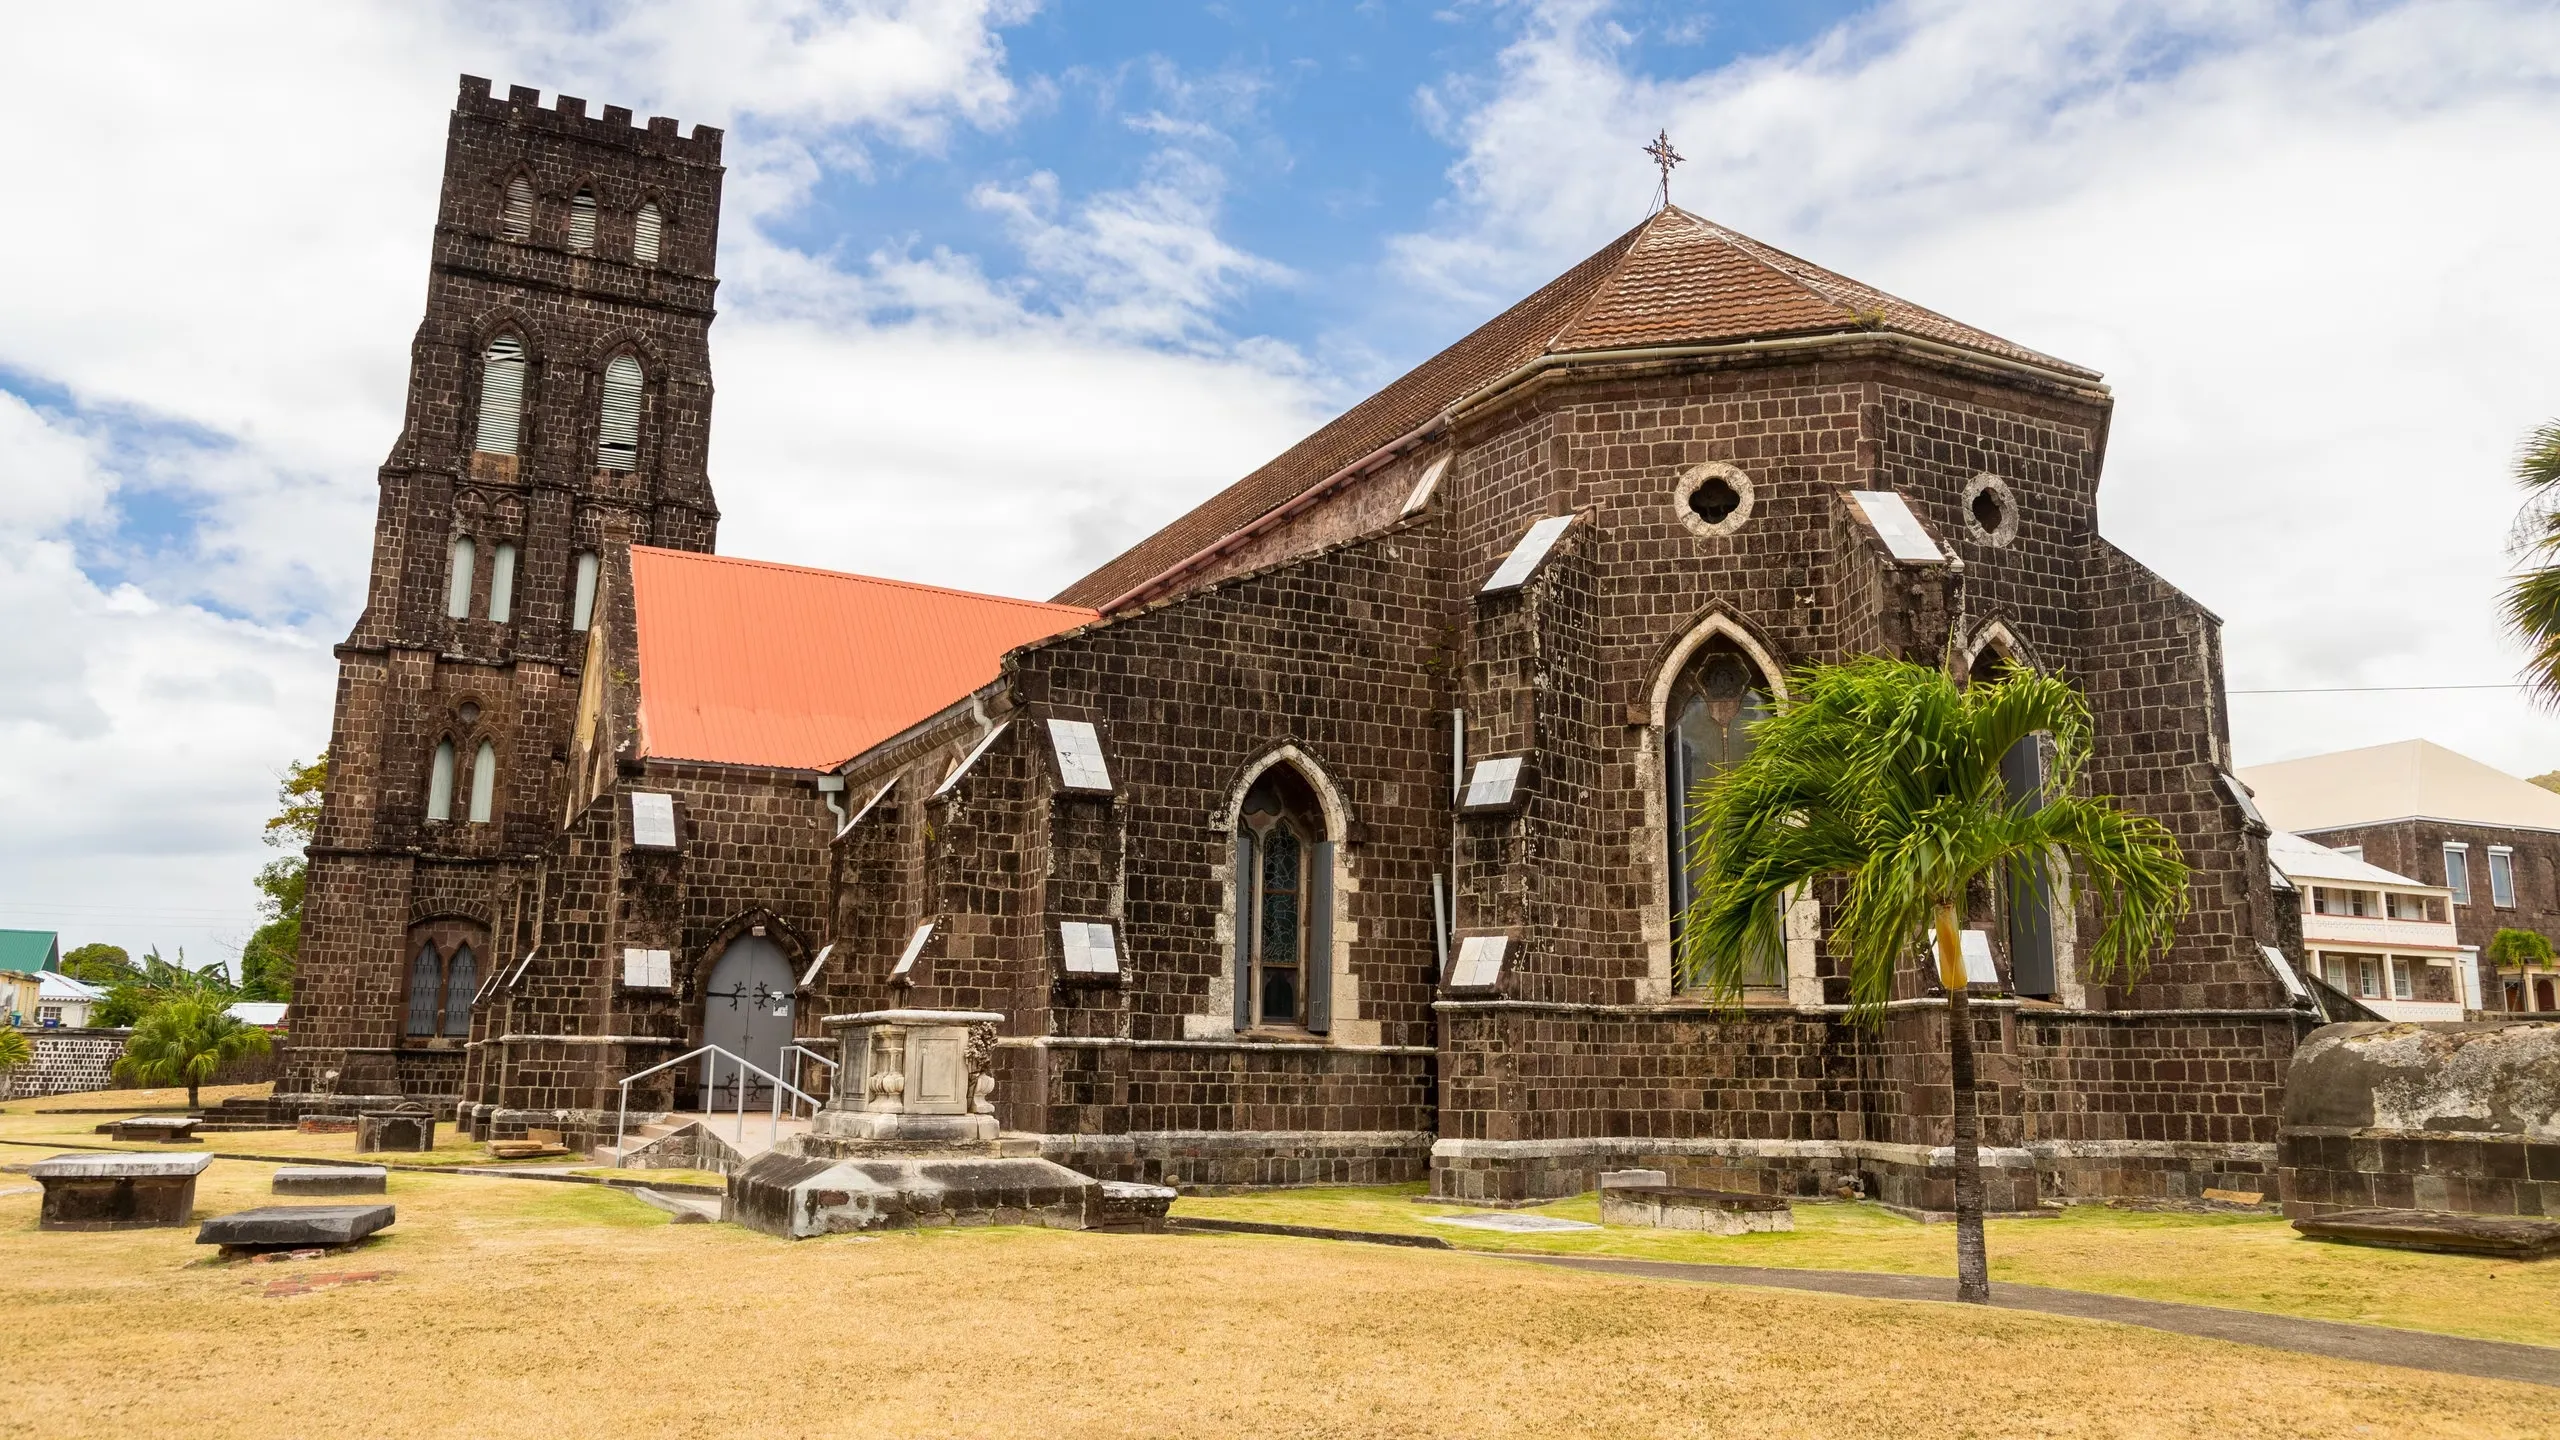 St. George’s Anglican Church in Saint Kitts and Nevis, Caribbean | Architecture - Rated 0.9